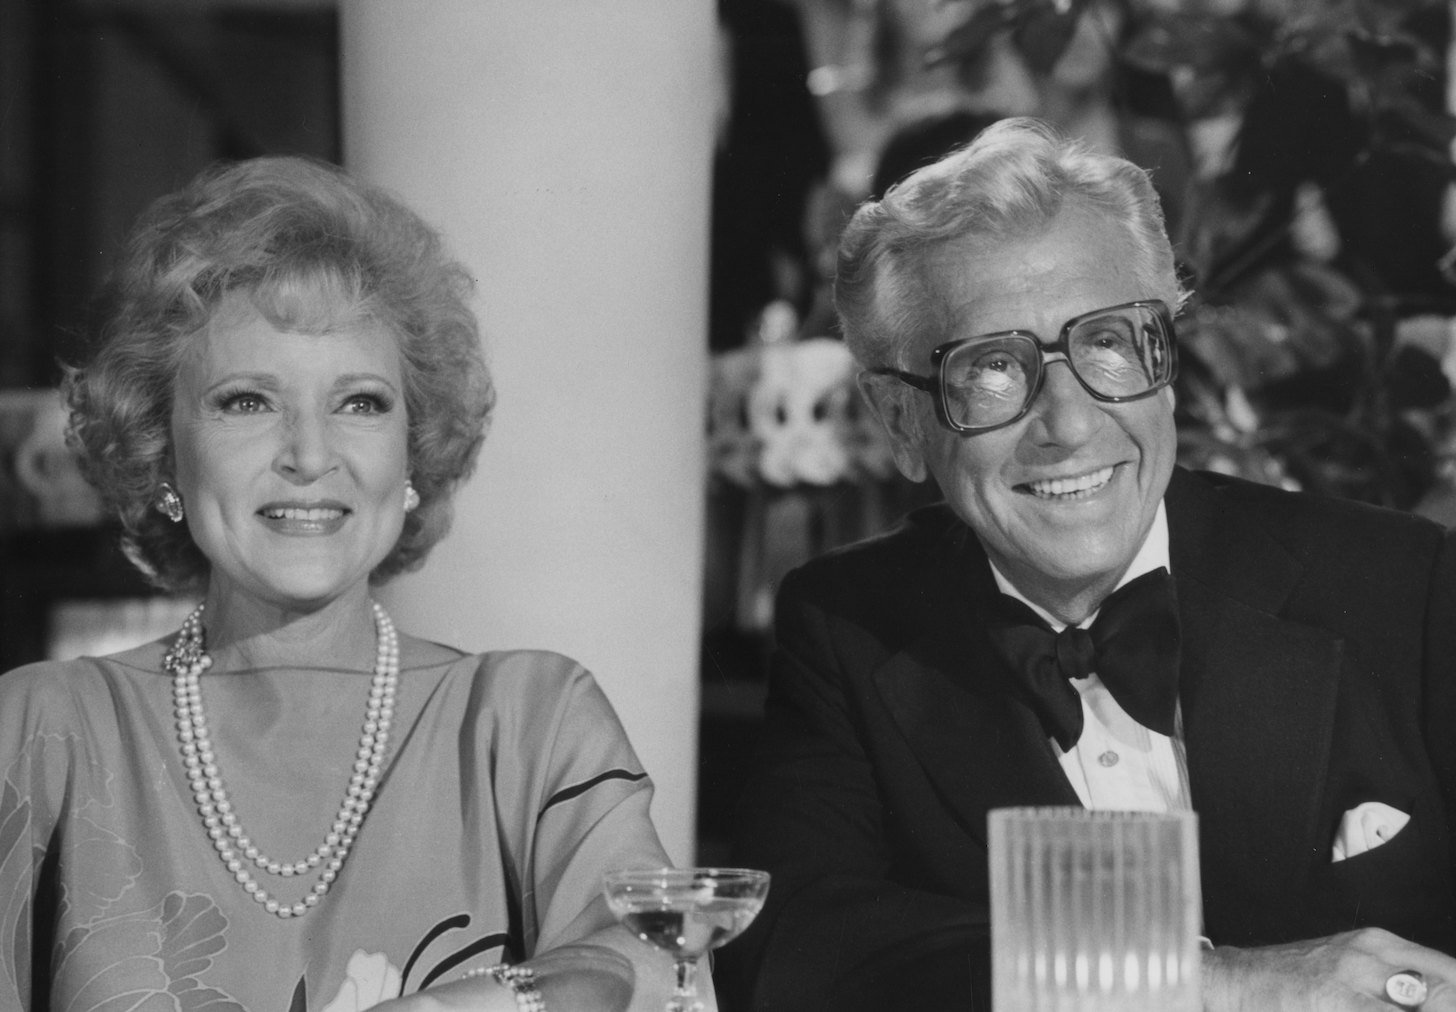 Betty White stepchildren are from Allen Ludden. Here is a black-and-white photo of Betty White and Allen Ludden sitting next to each other and smiling.